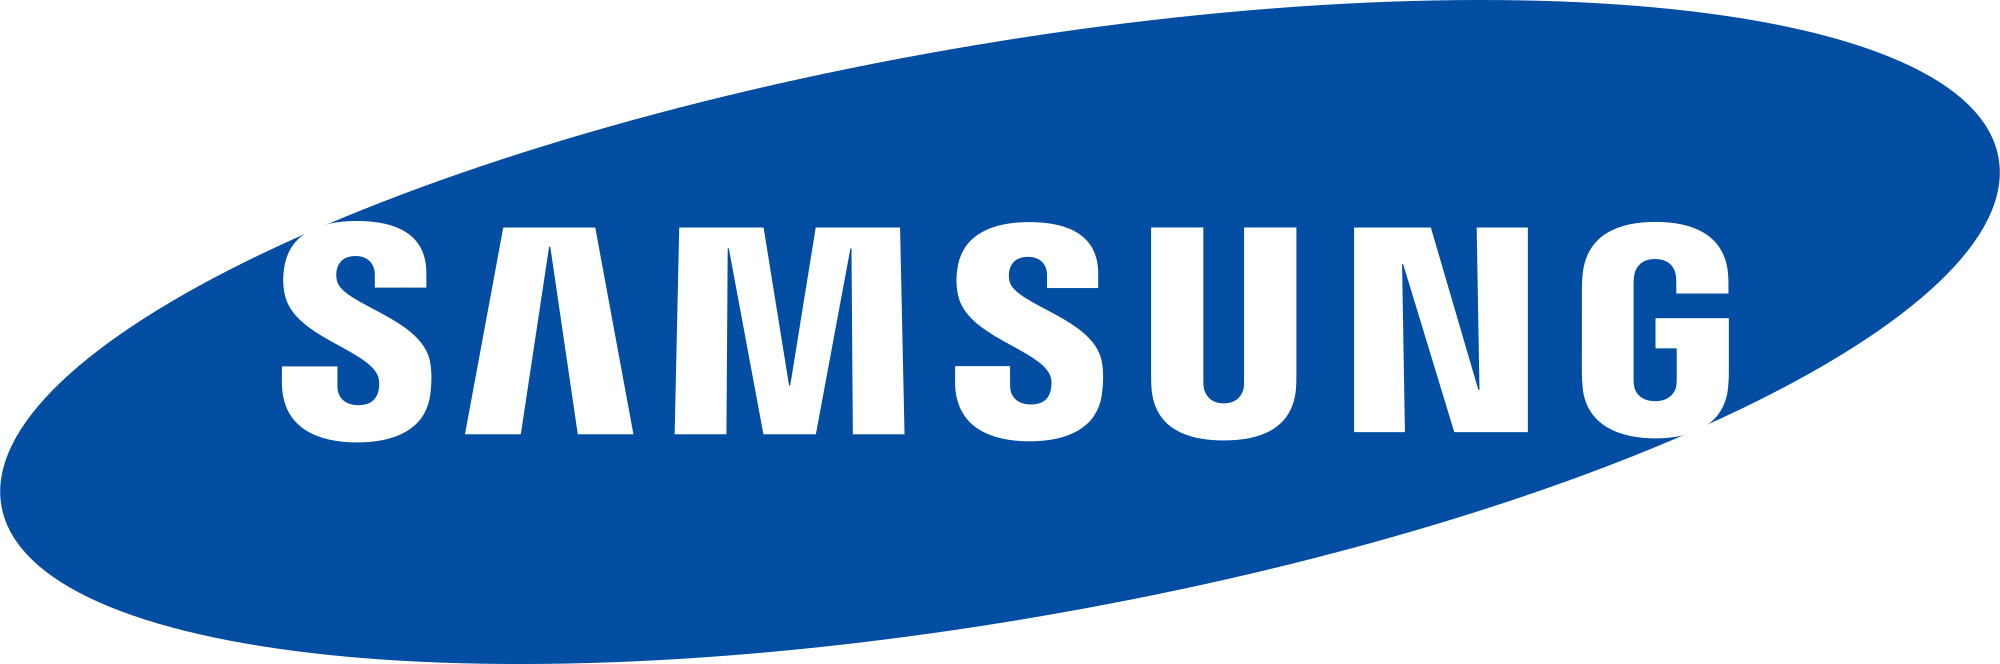 Brand with Blue Oval Logo - File:Samsung Logo.svg - Wikimedia Commons